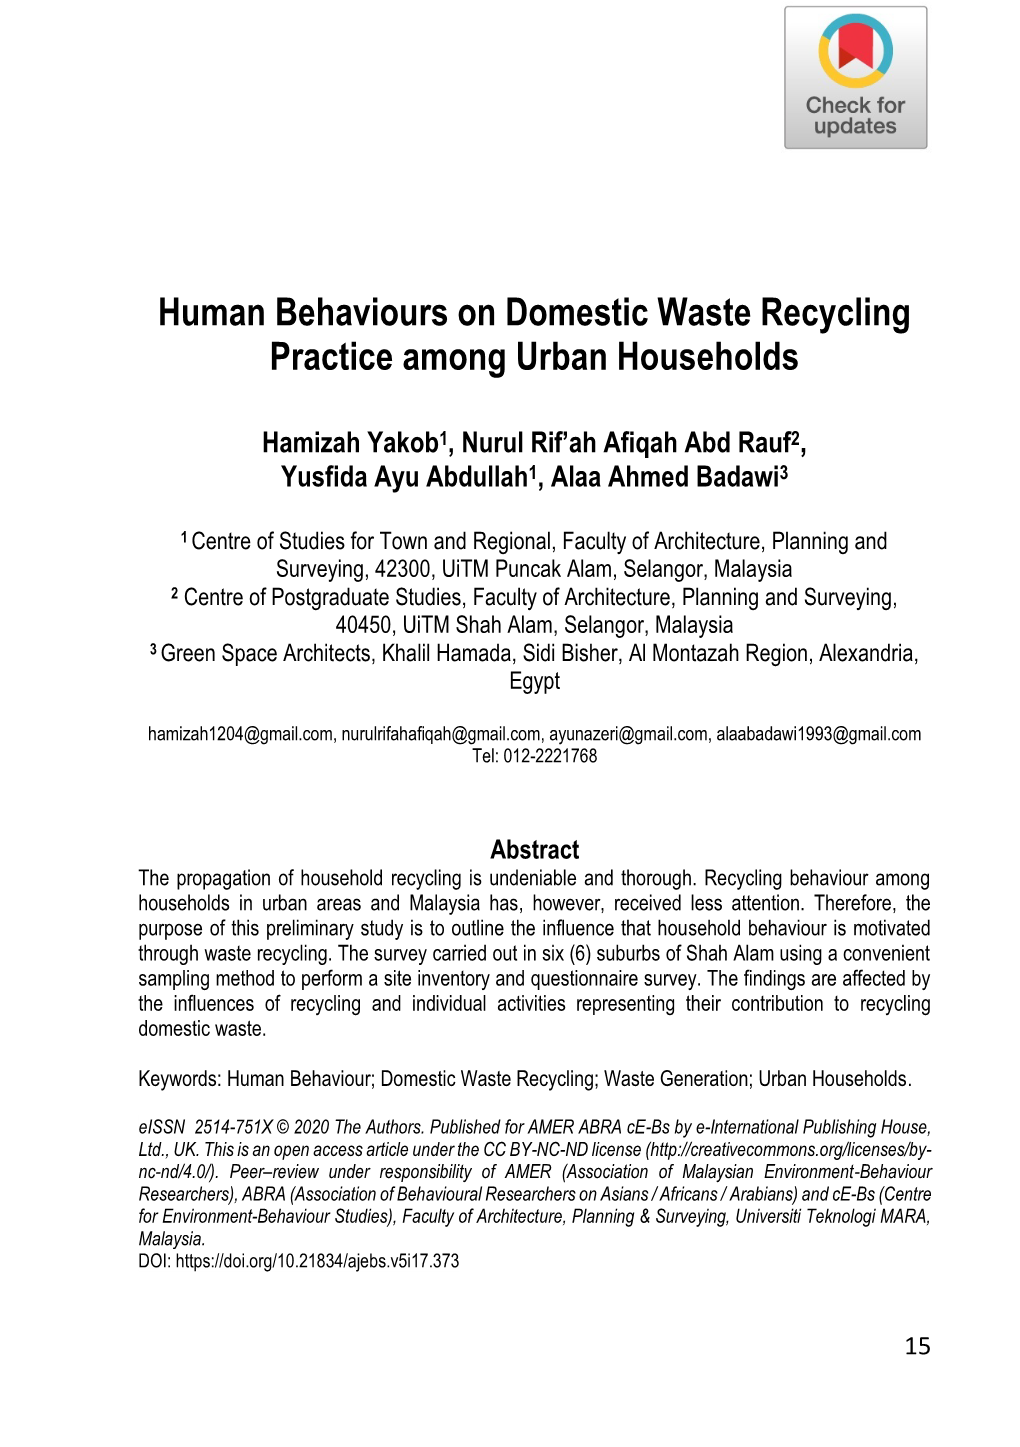 Human Behaviours on Domestic Waste Recycling Practice Among Urban Households